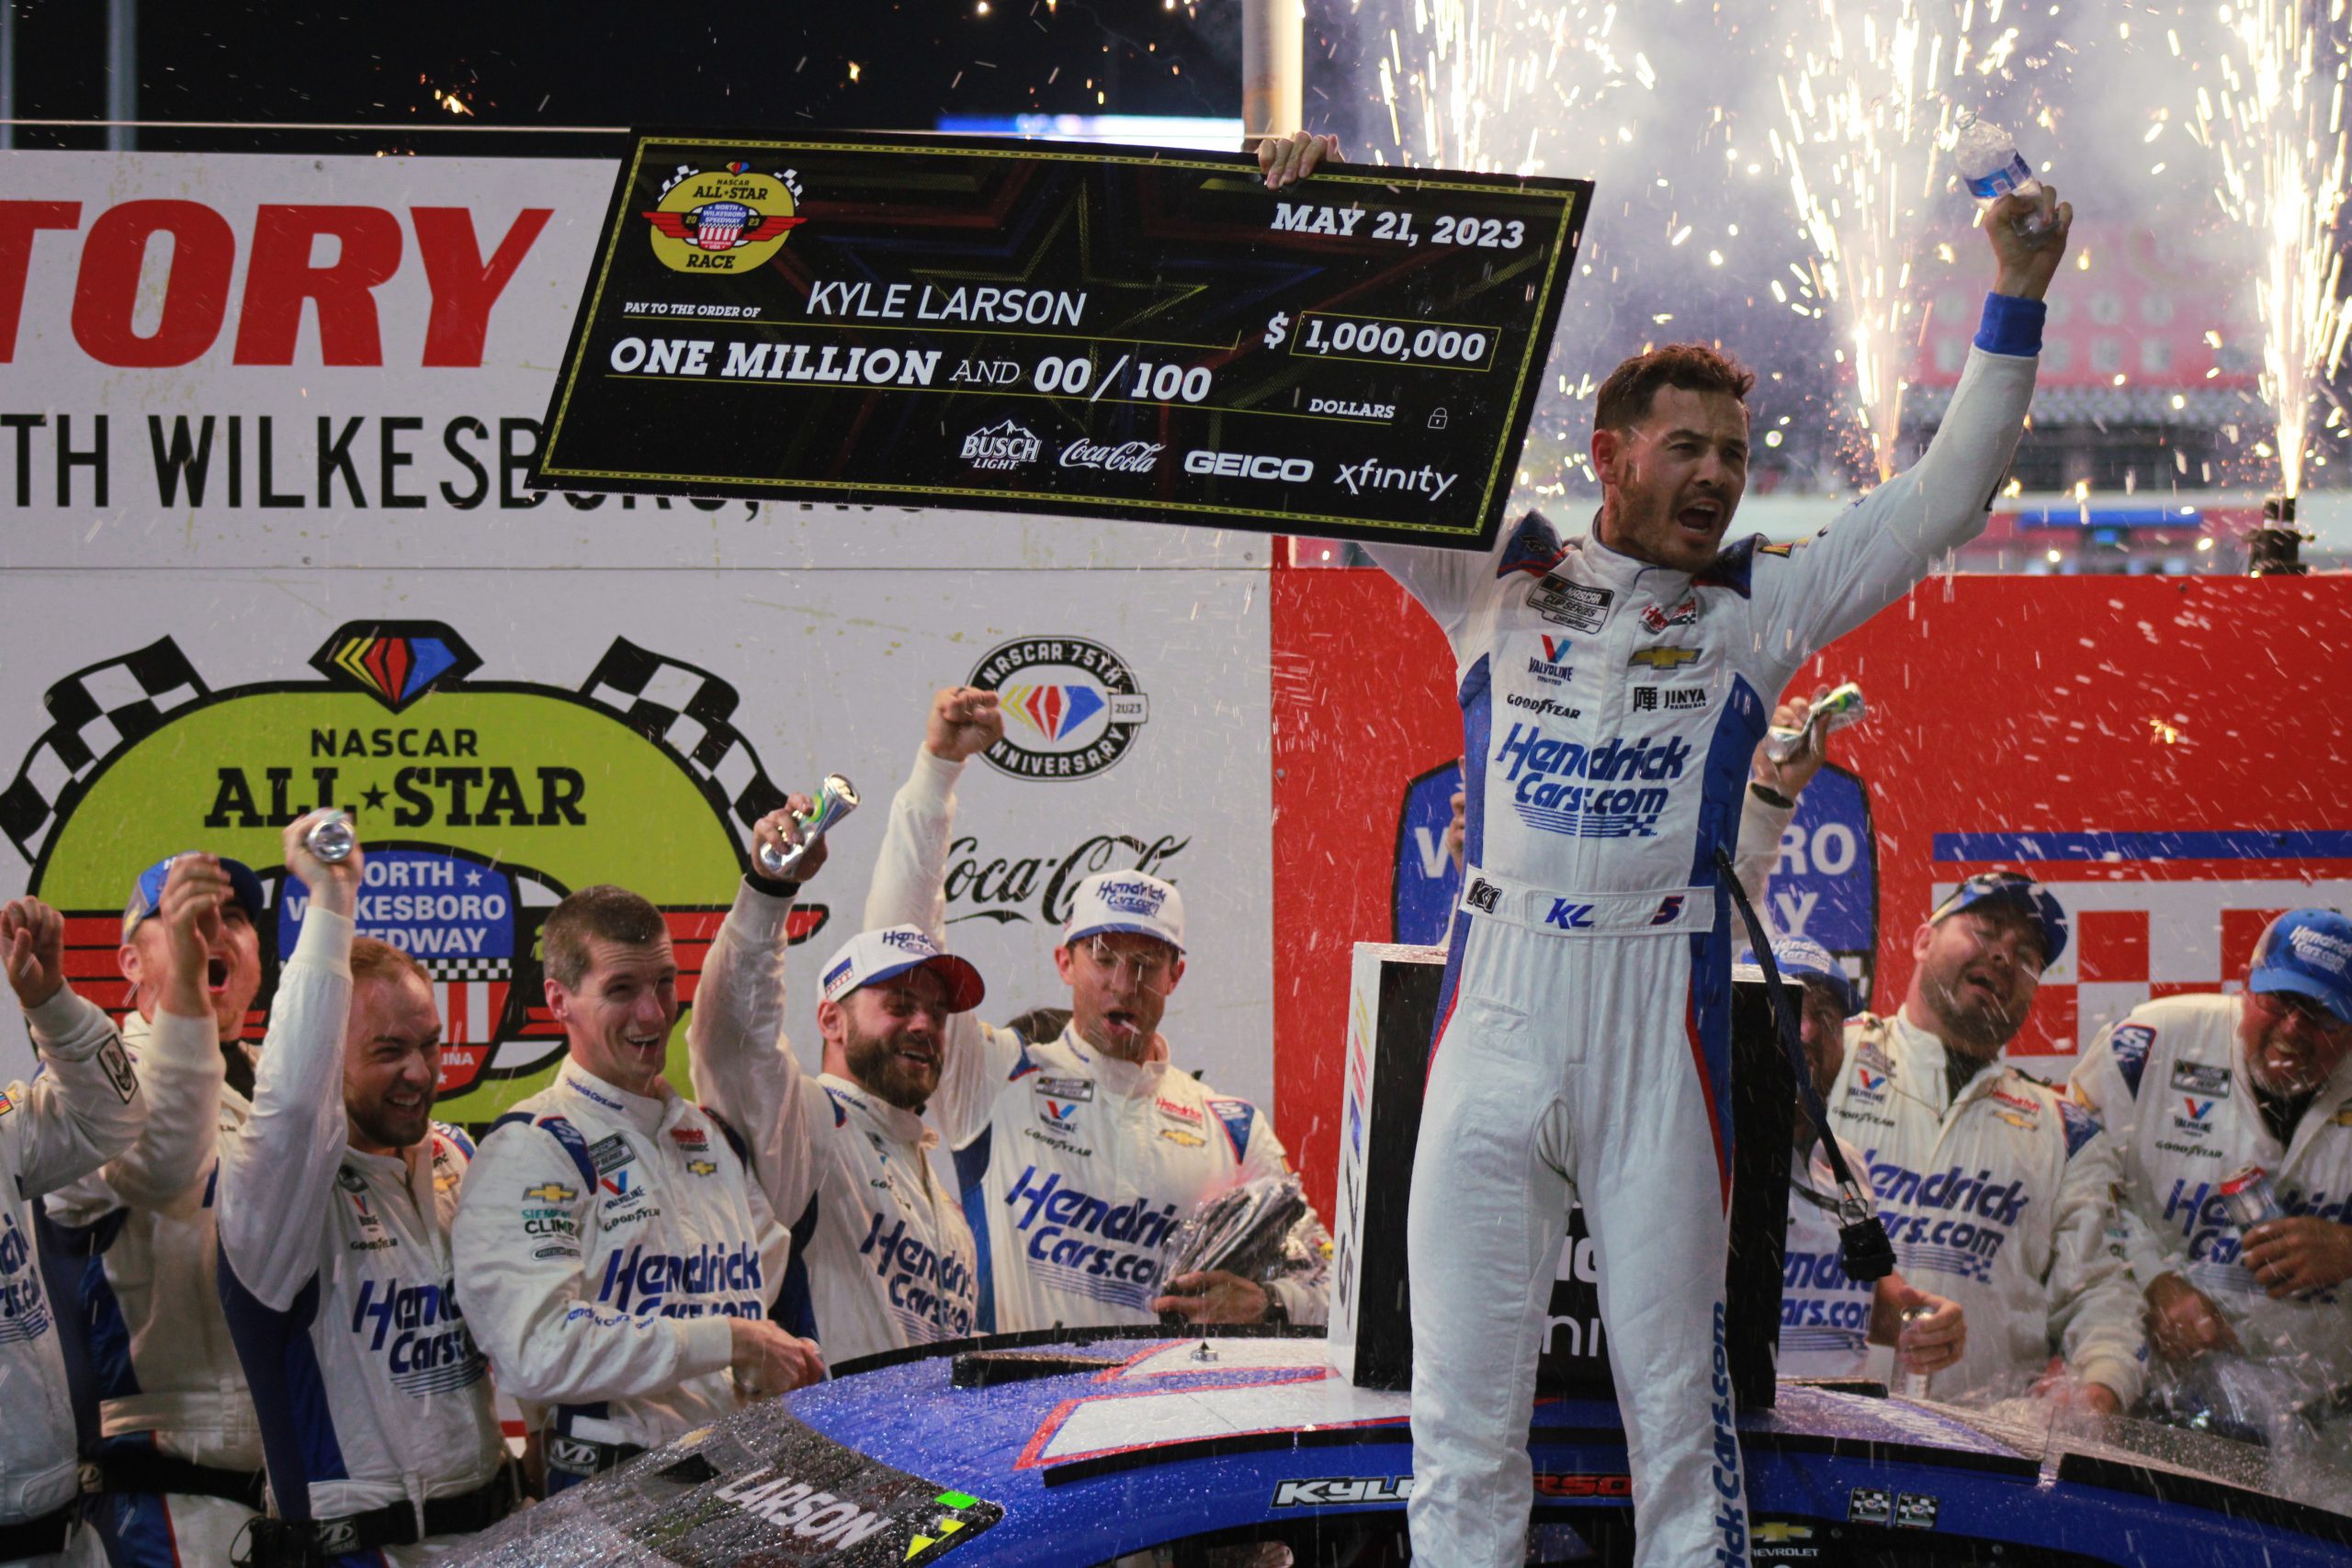 Kyle Larson netted another $1 million prize after winning the 39th NASCAR All-Star Race at North Wilkesboro Speedway. (Photo: Trish McCormack | The Podium Finish)